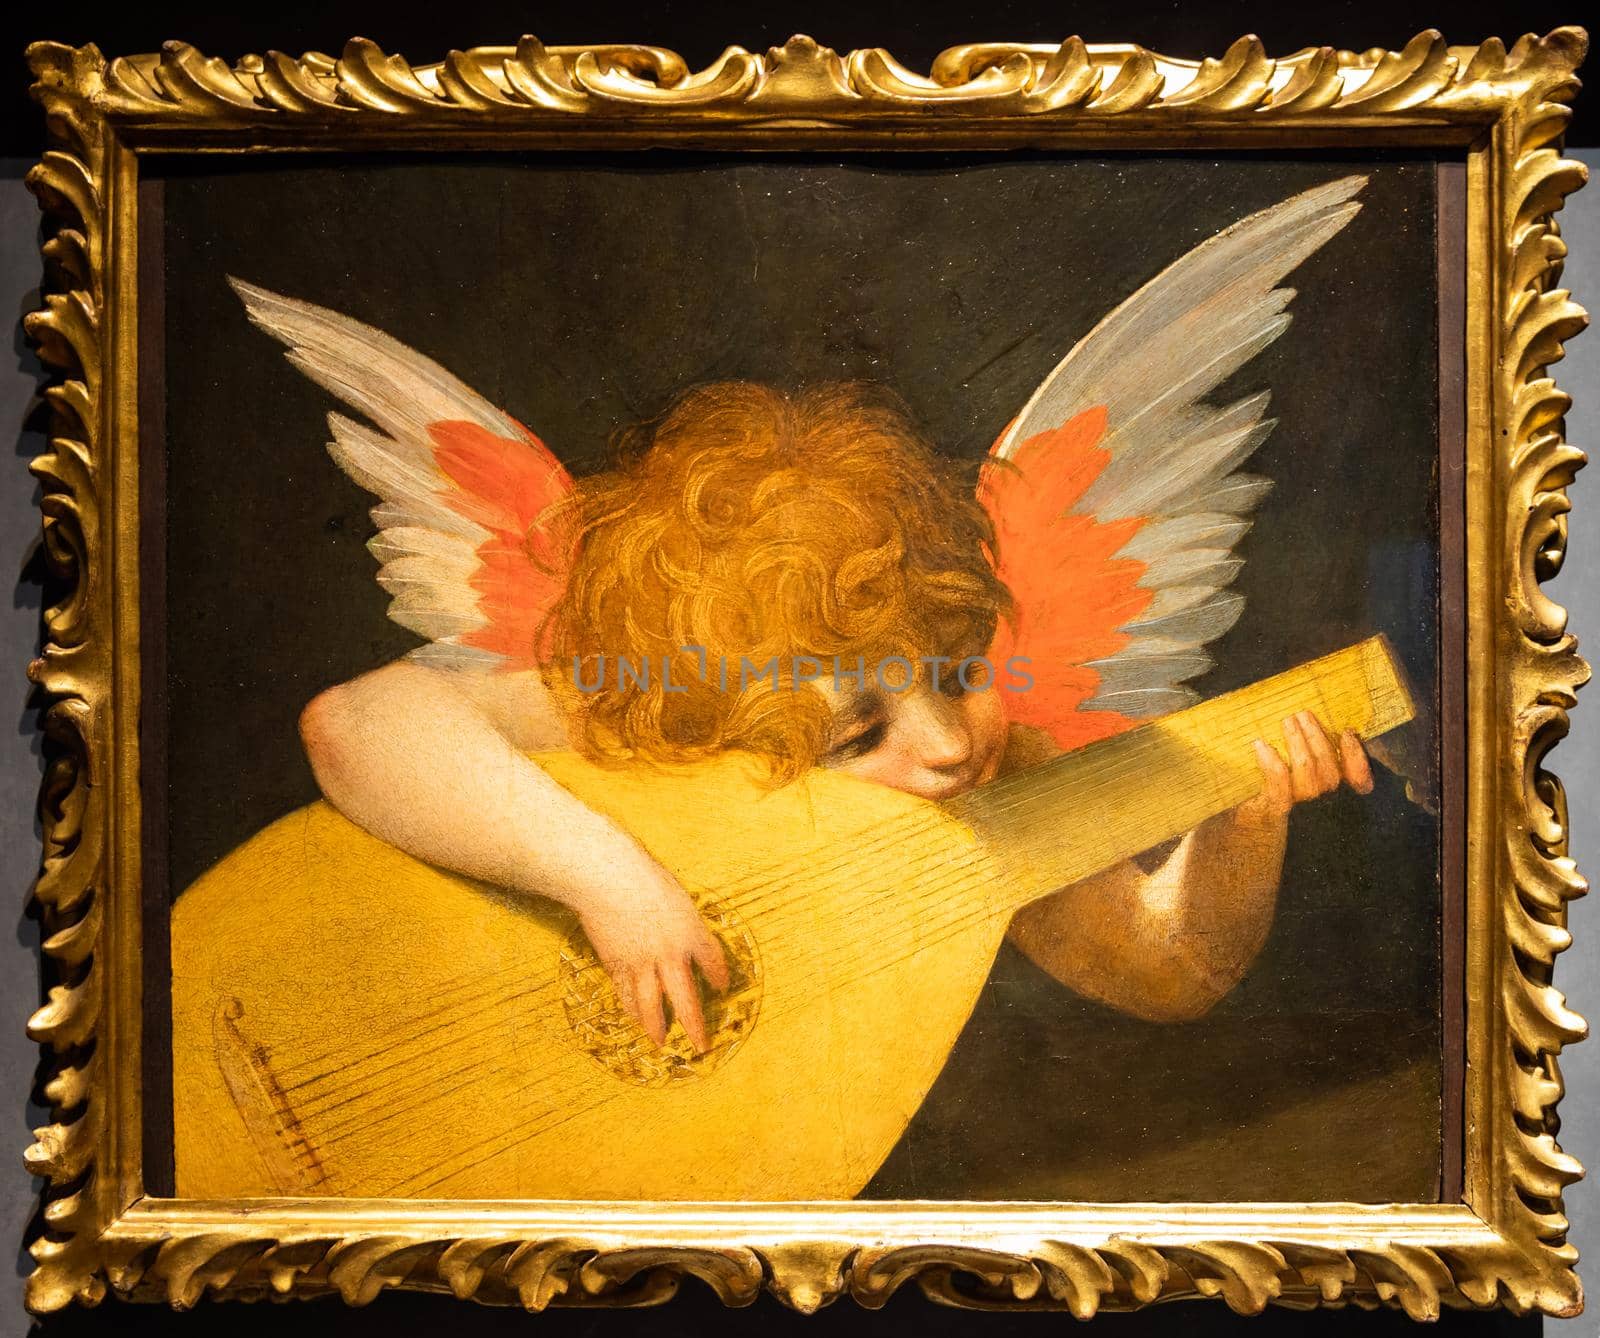 Florence, Italy - Circa August 2021. Angel playing a lute by Rosso Fiorentino, c.1521 - oil on panel